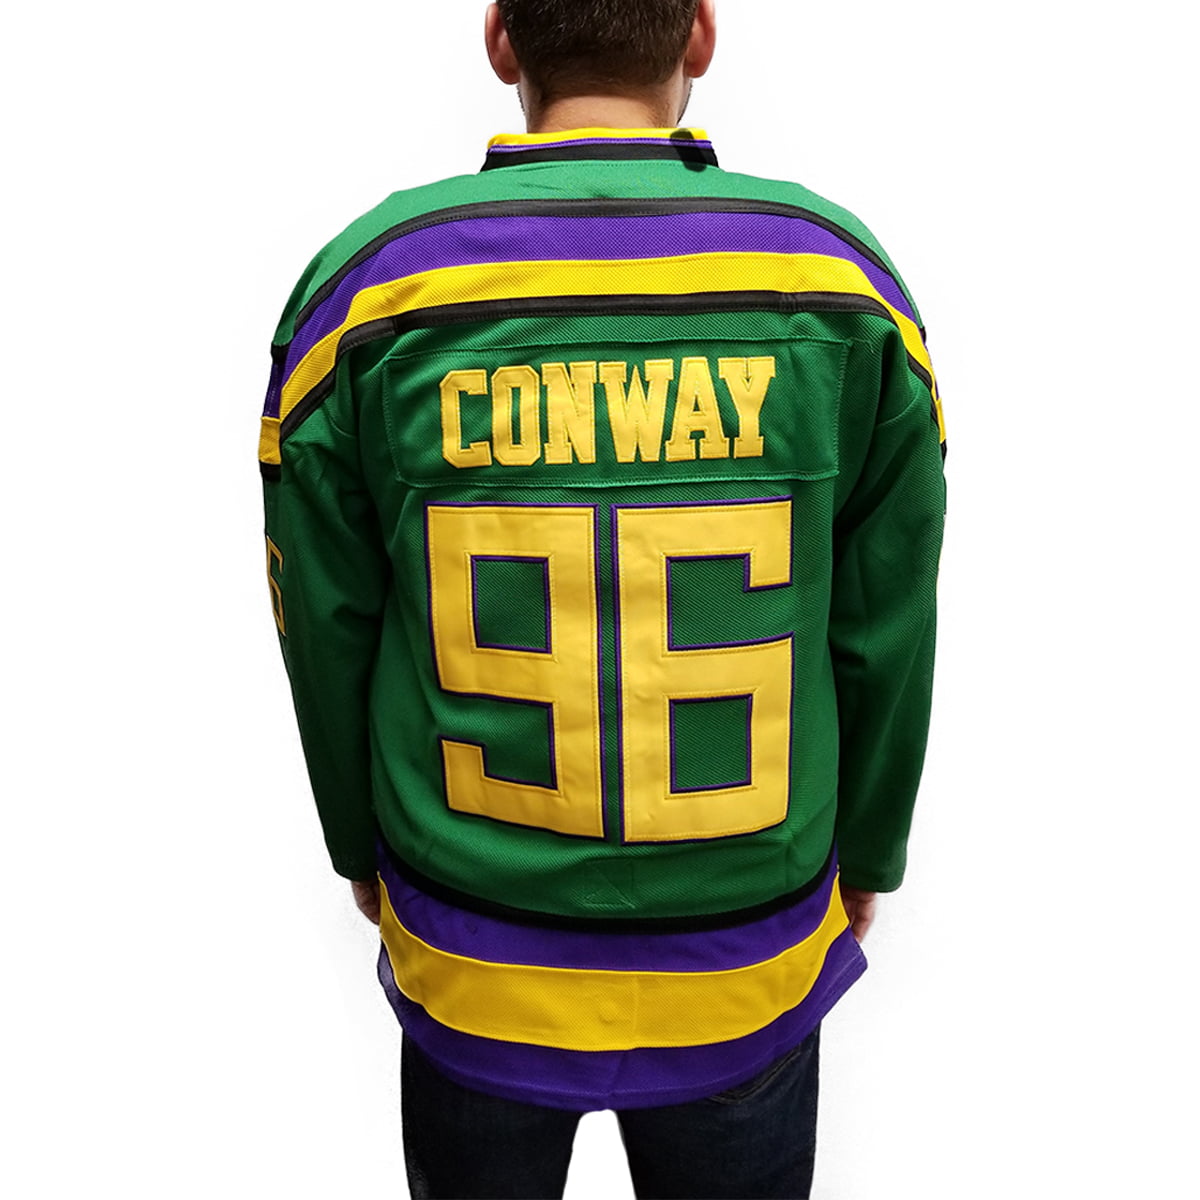 BuyMovieJerseys The Might Ducks Movie Hockey Jersey #96 Charlie Conway Halloween Costume Party Shirts Club Wear 90s Clothing for Men Women 3XL